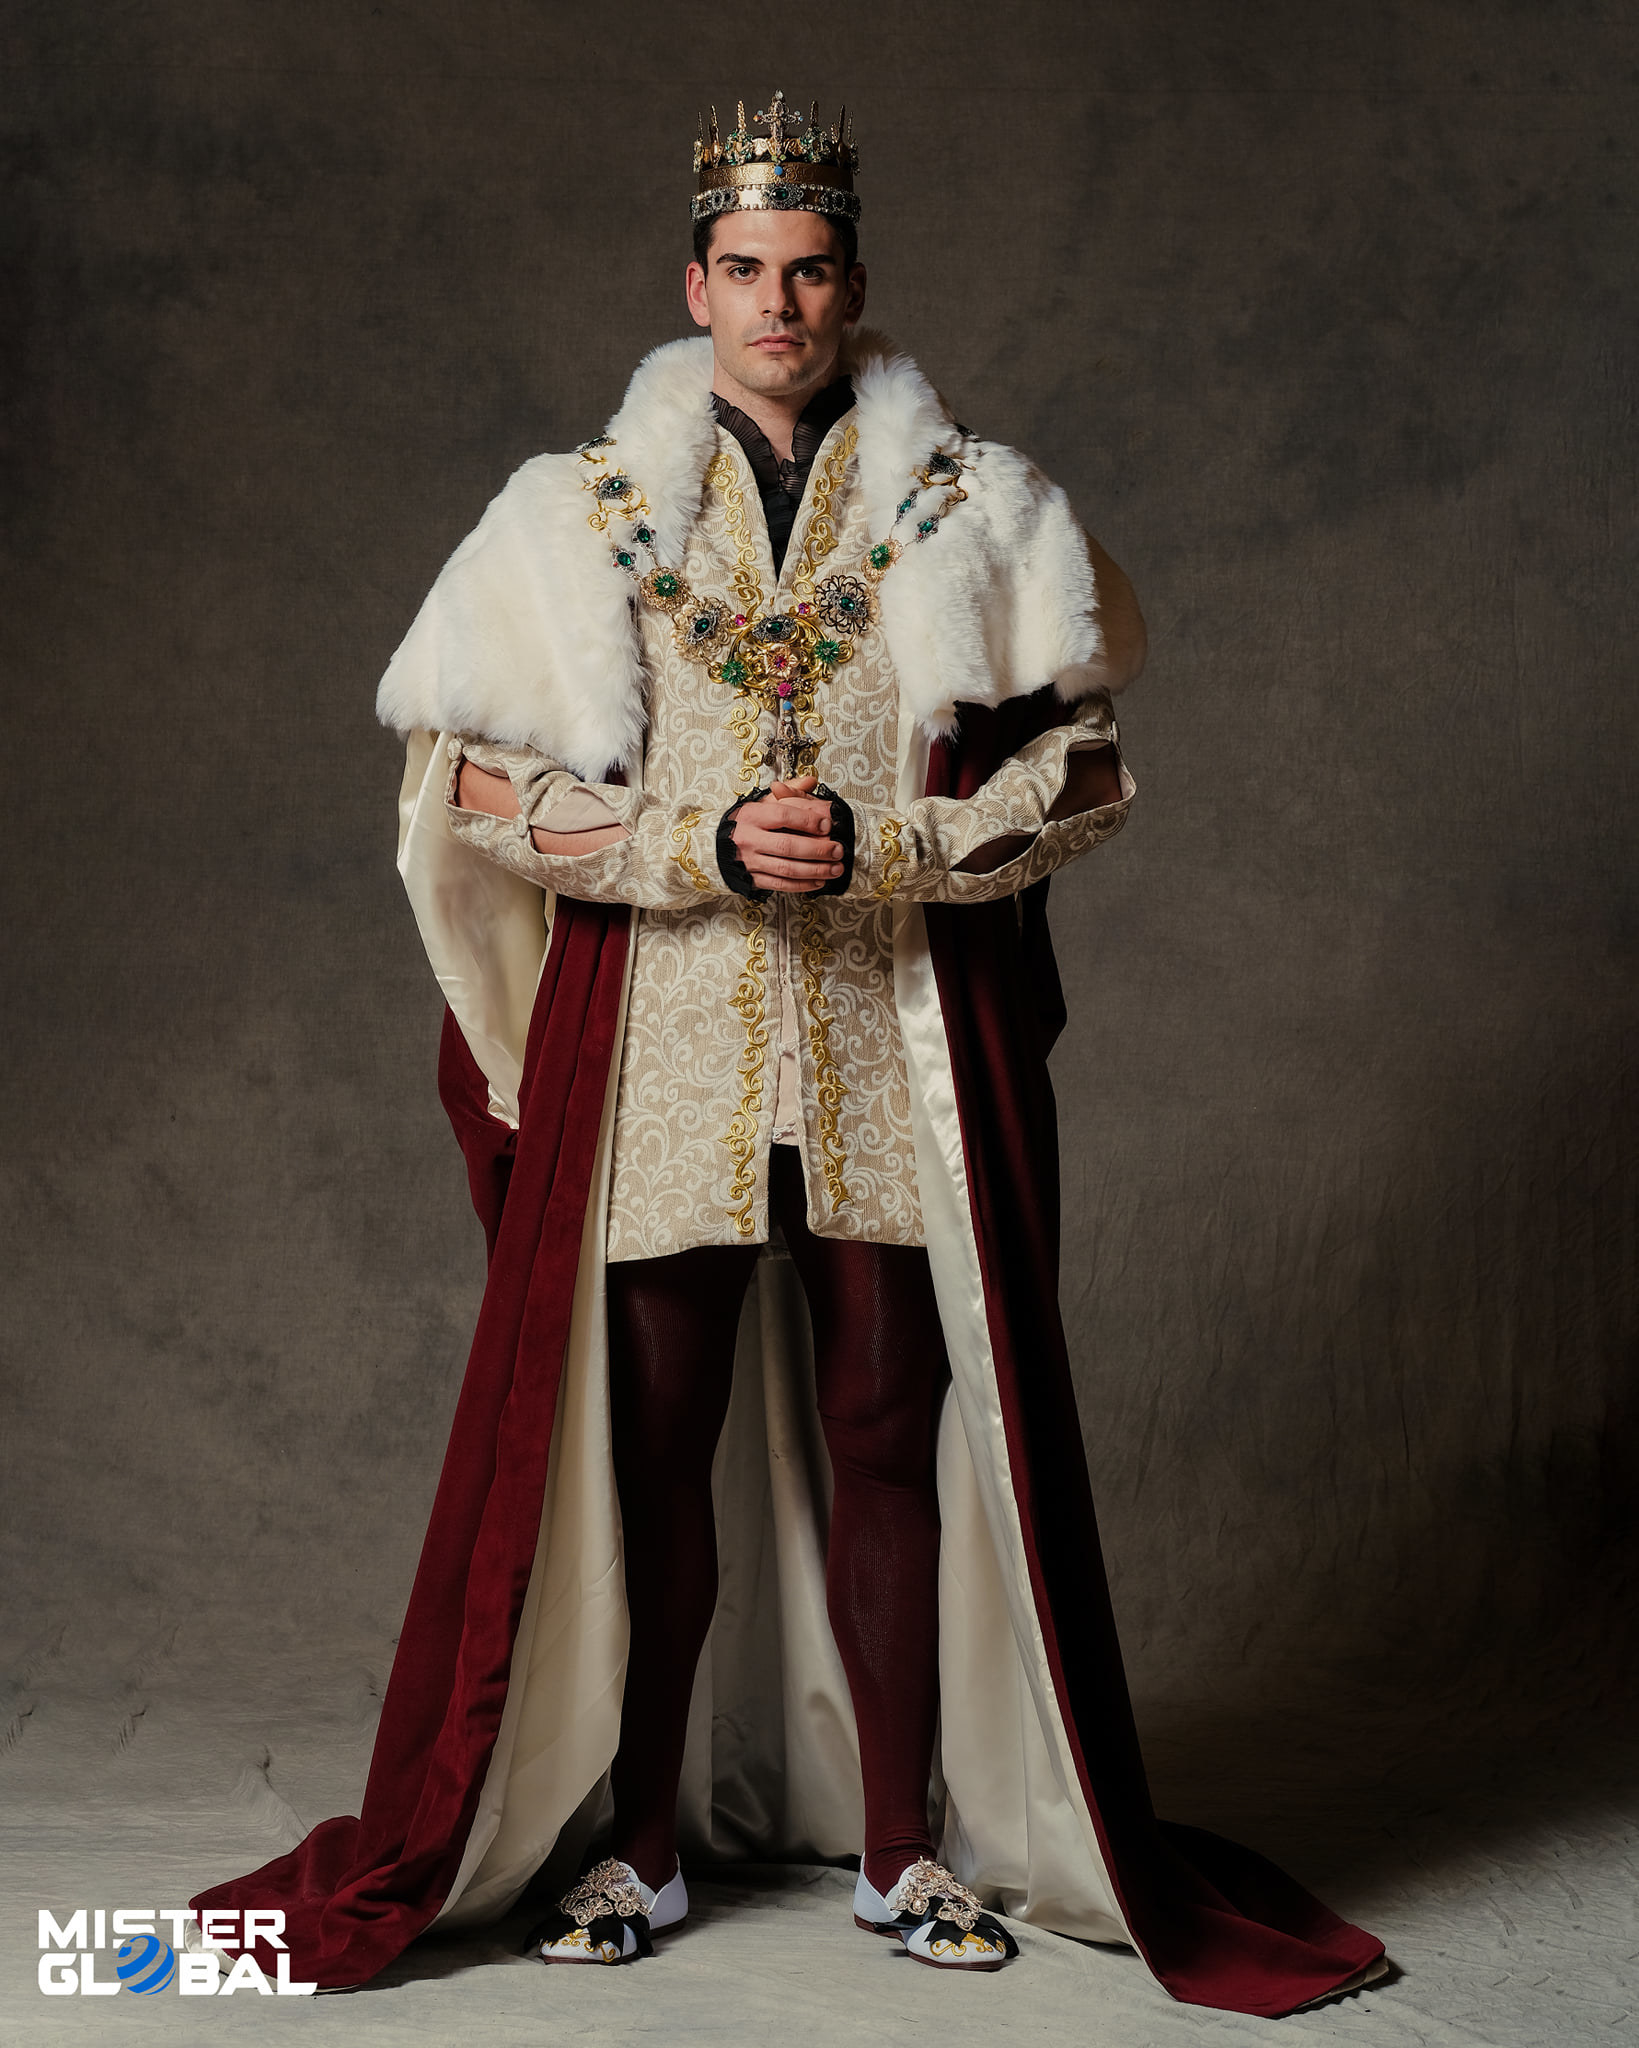 Man wearing a crown, long robe, ornate jacket, and tights